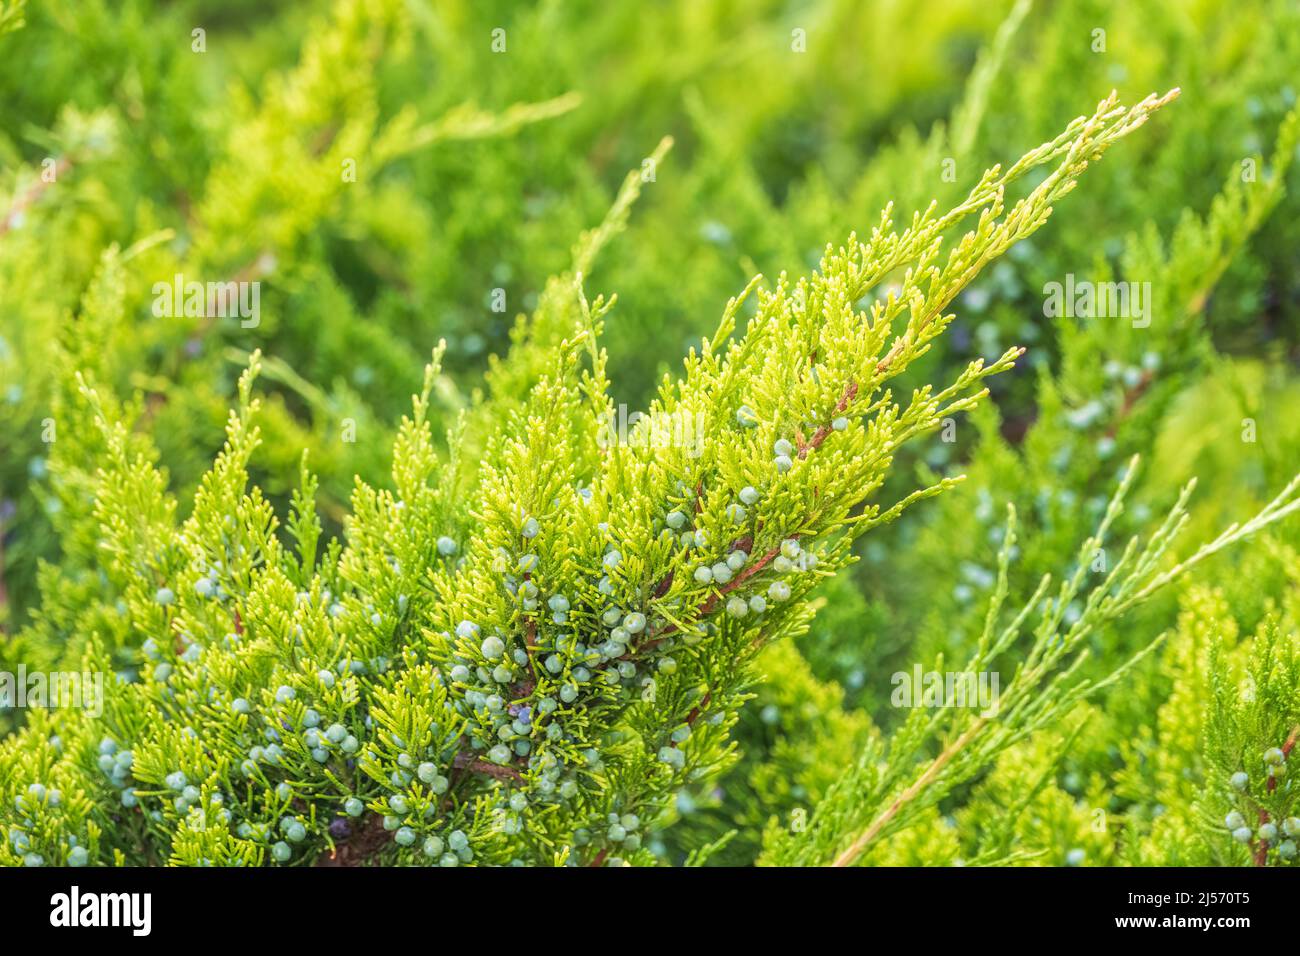 Green branches and young leaves of a thuja tree. Background image. Stock Photo